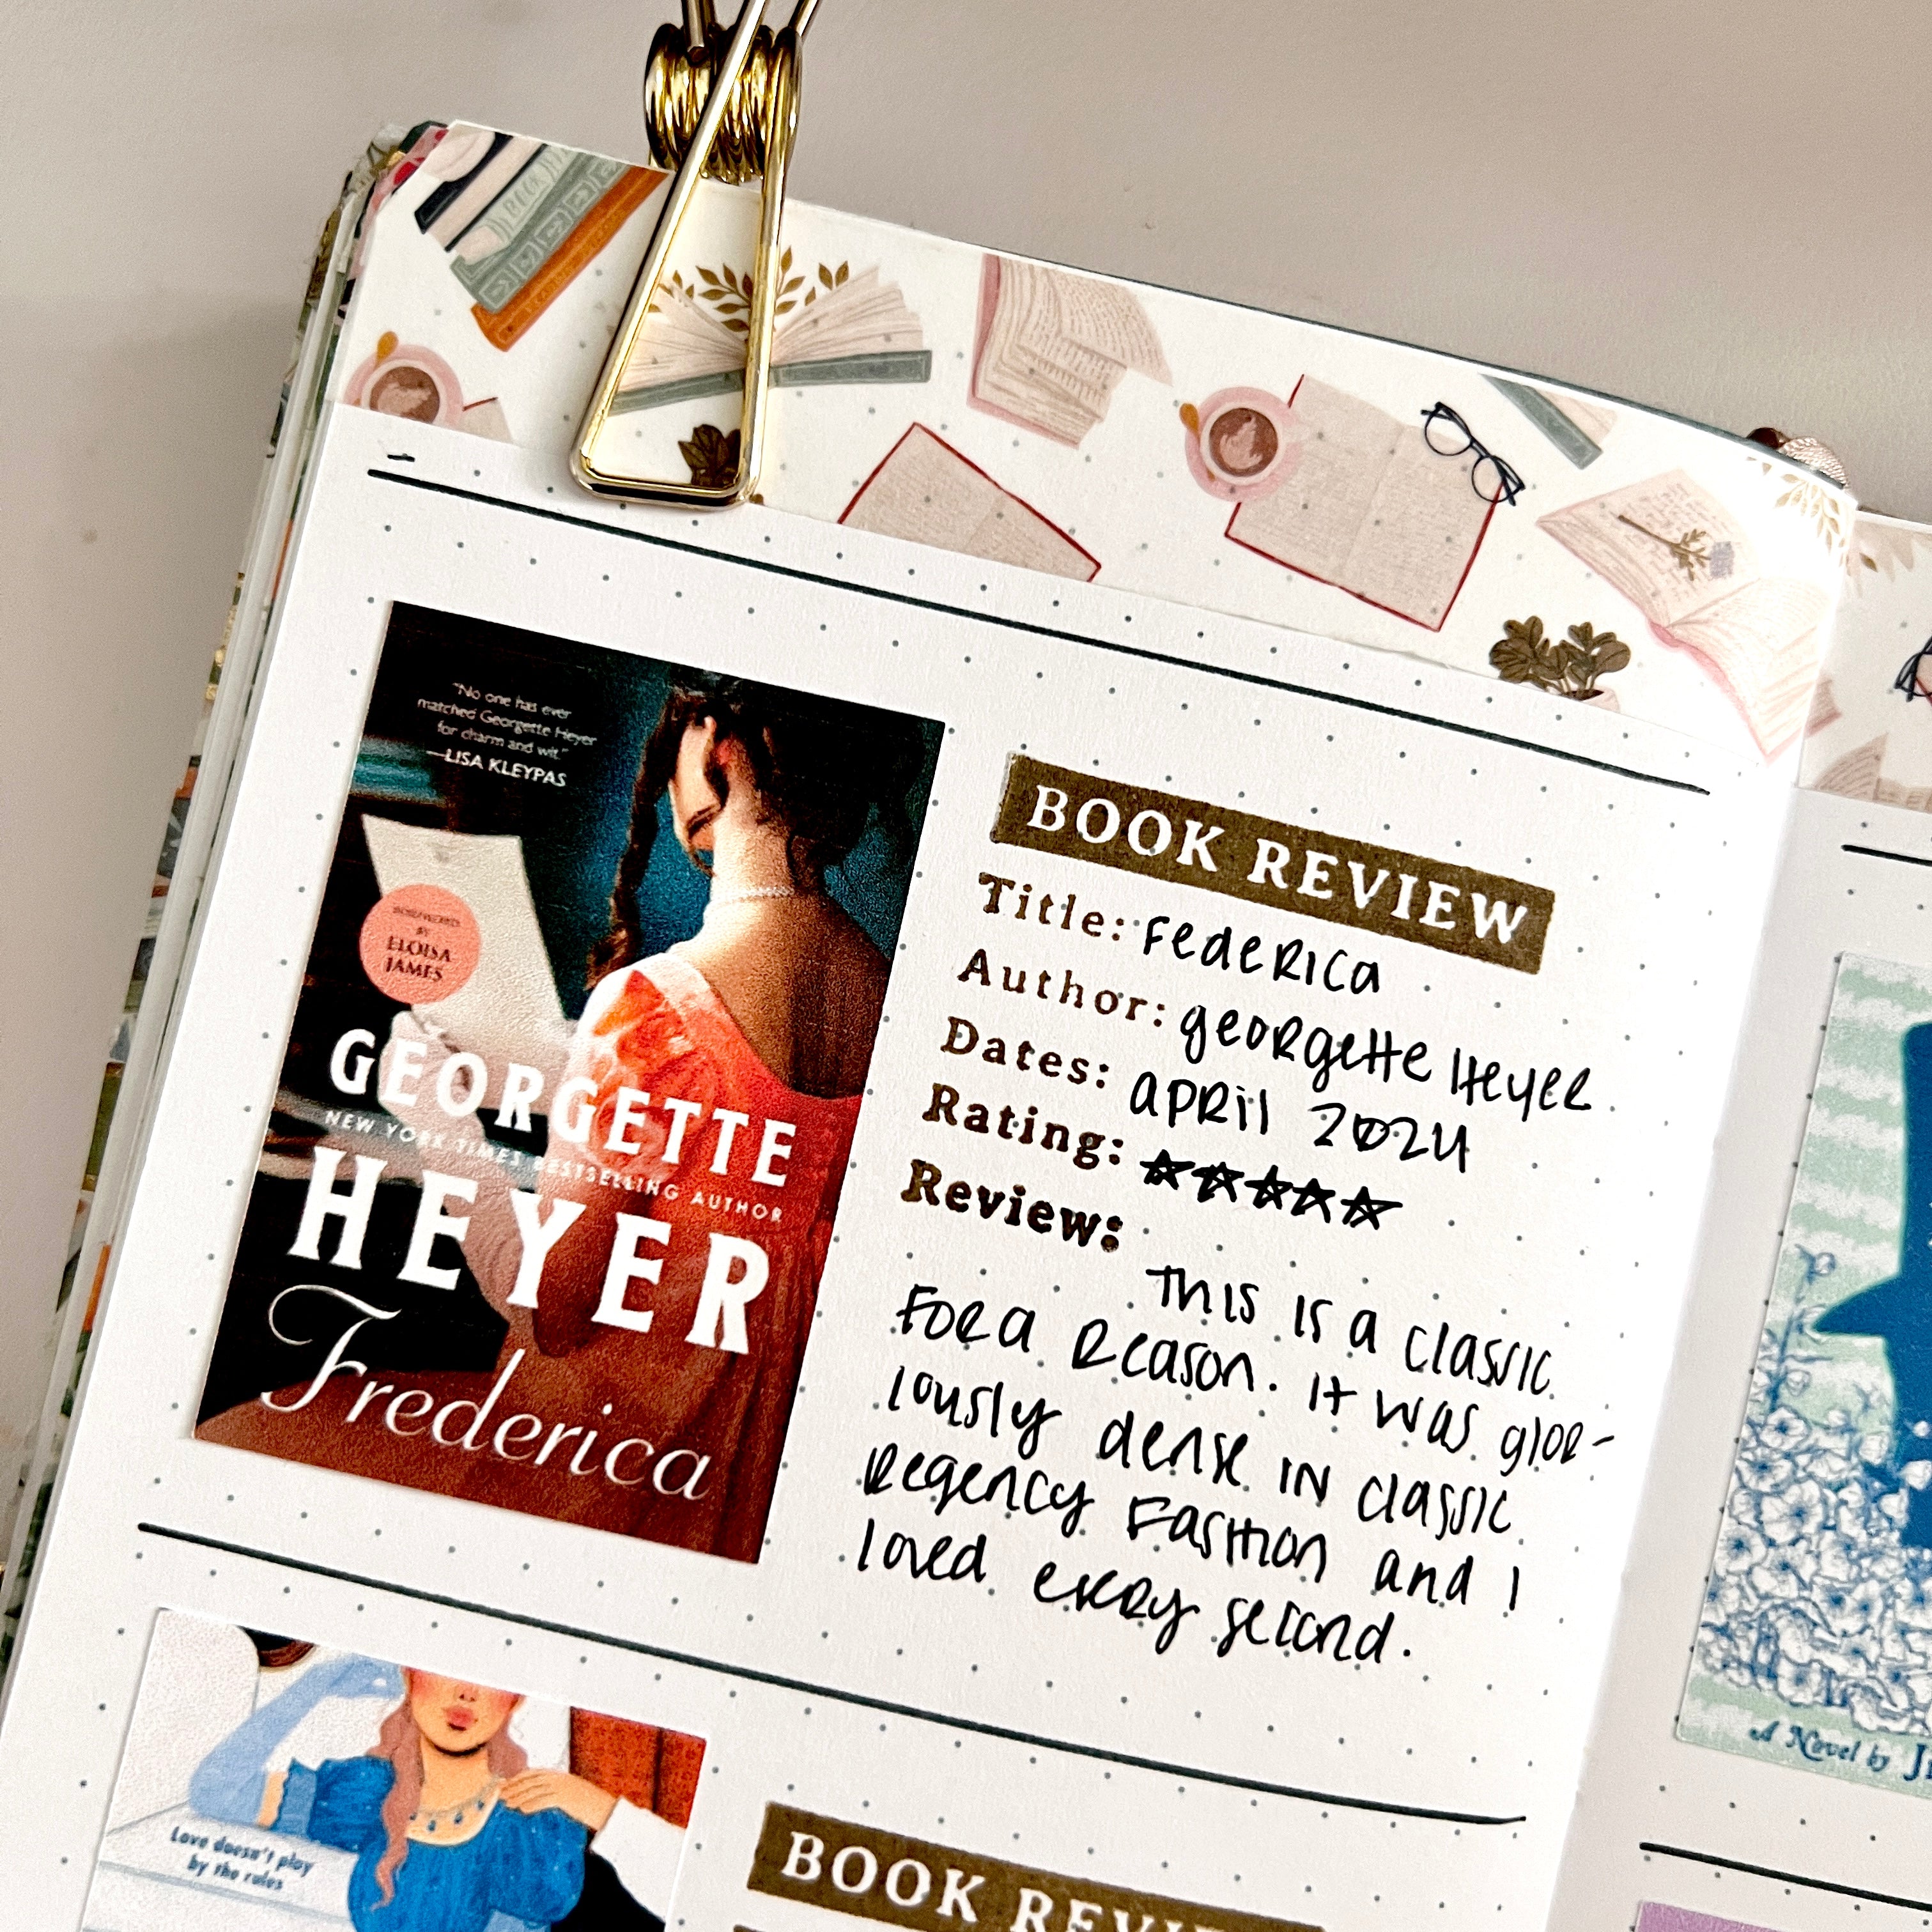 An image of the upper left hand corner of bullet journal showing a simple and brief book review of Federica by Georgette Heyer